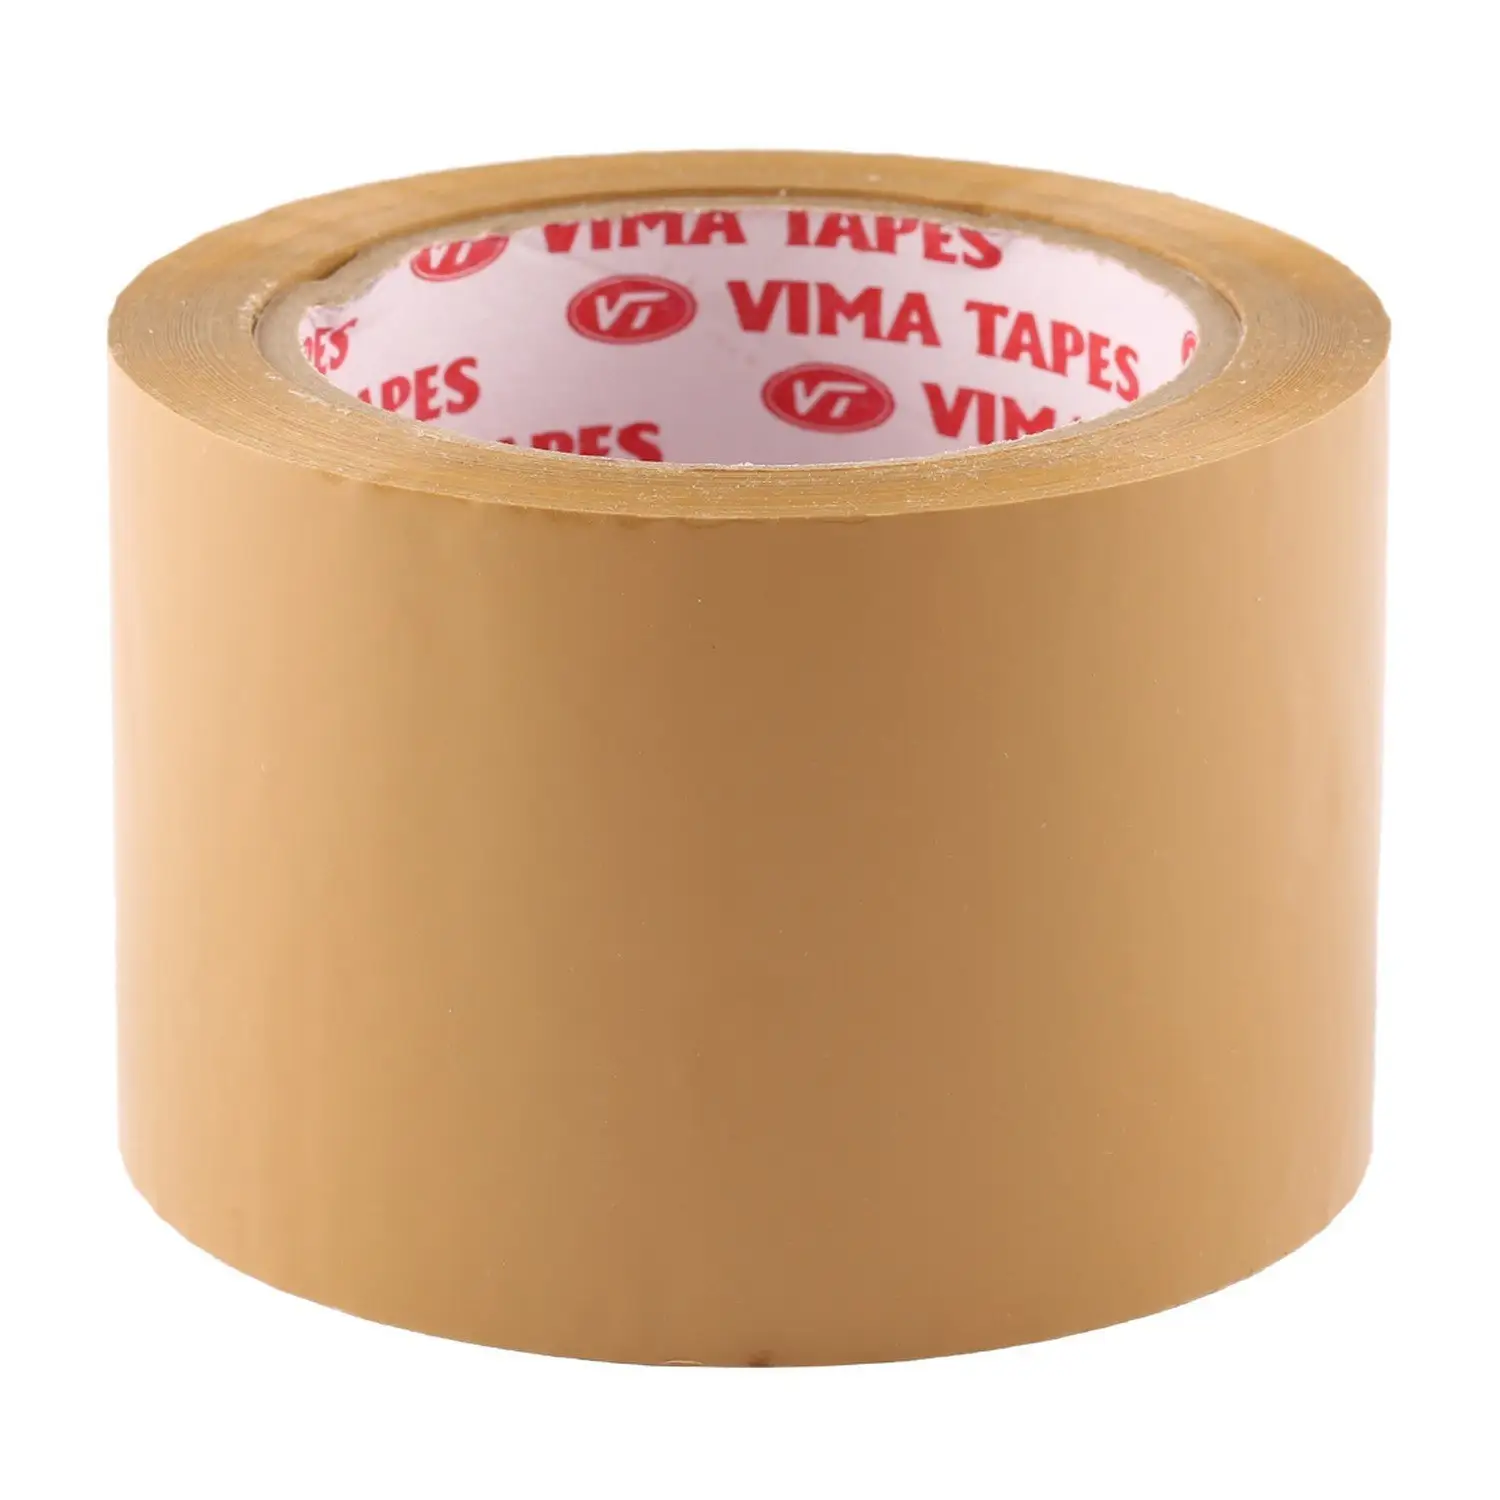 48 mm / 42 microns / 65 mm Brown Cello Tape self Adhesive Cello Premium Quality Tape for Packaging use tapes- VIMA Brand